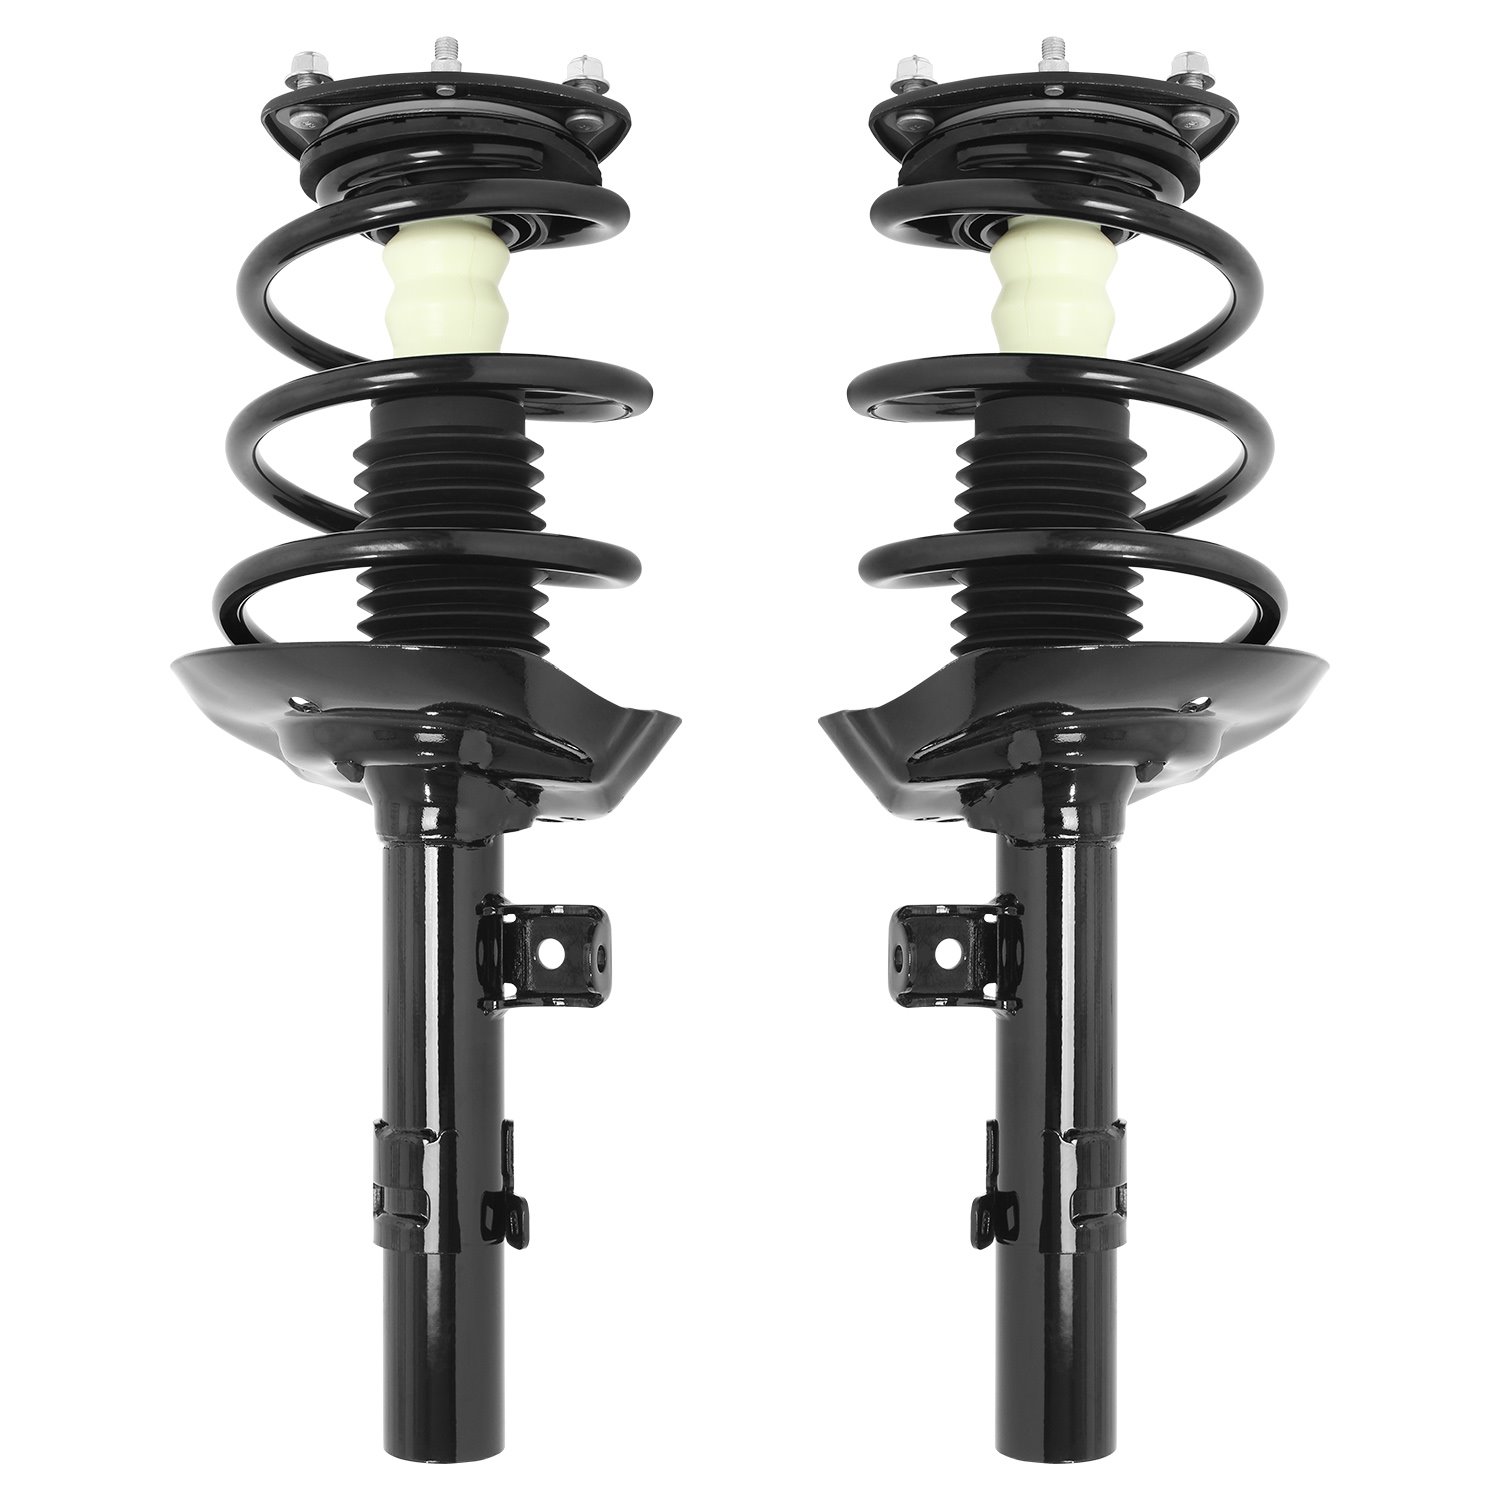 2-11215-11216-001 Suspension Strut & Coil Spring Assembly Set Fits Select Honda Accord